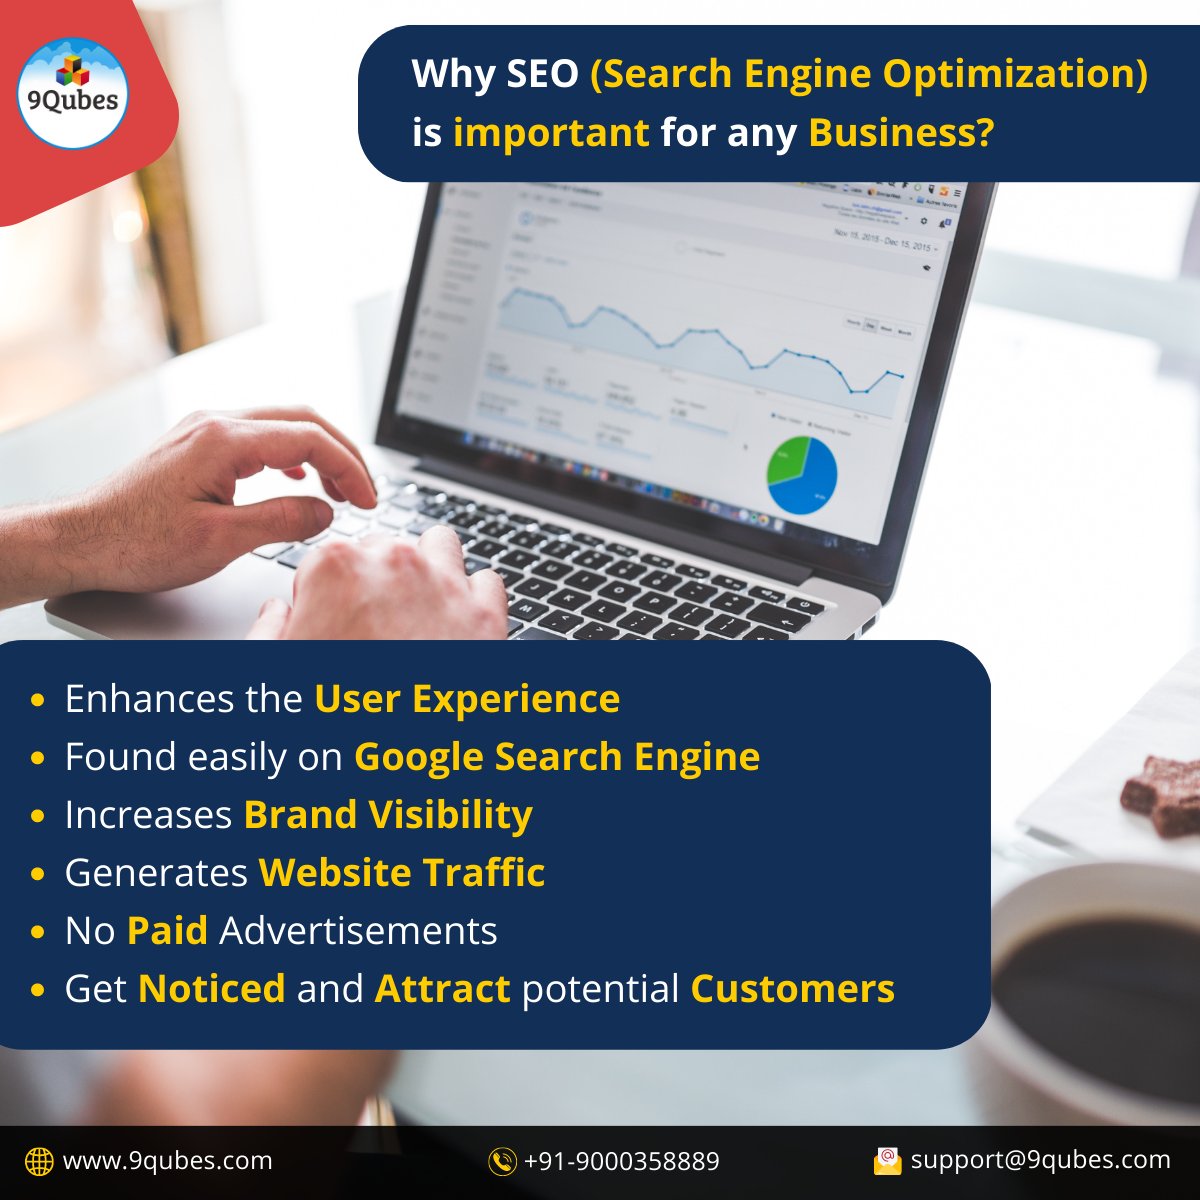 Why SEO (Search Engine Optimization)
is important for any Business?
#9qubes #itsolutions #seo #google #rankingongoogle #bestseoservices #searhengineoptimization #onpageseo #offpageseo #googlerankings #seoservicesnearme #businessowner #business #entrepreneur #socialmediamarketing